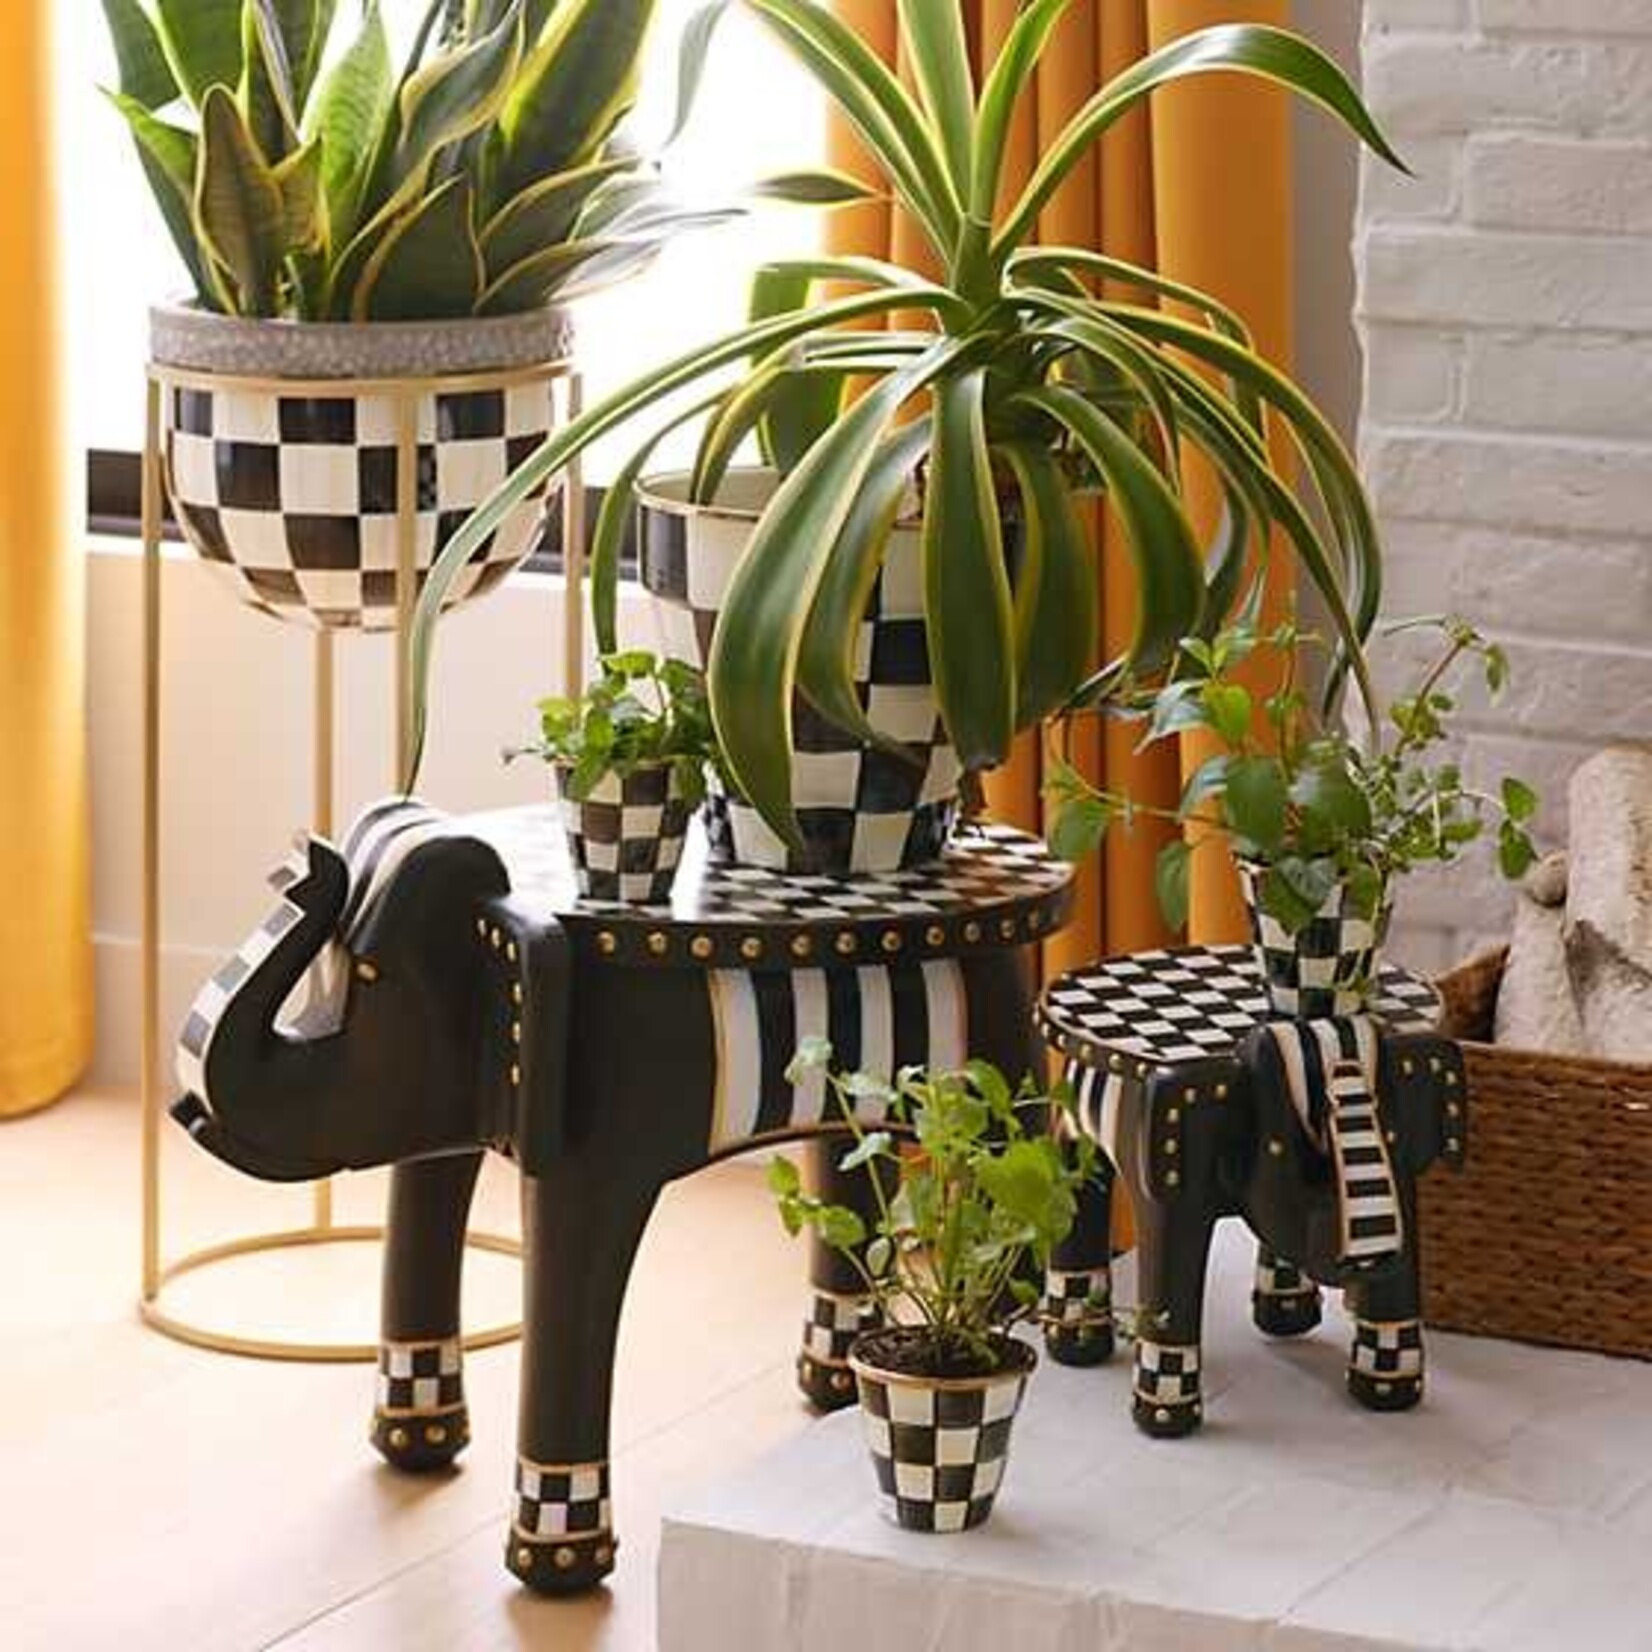 MacKenzie-Childs Elephant Accent Table